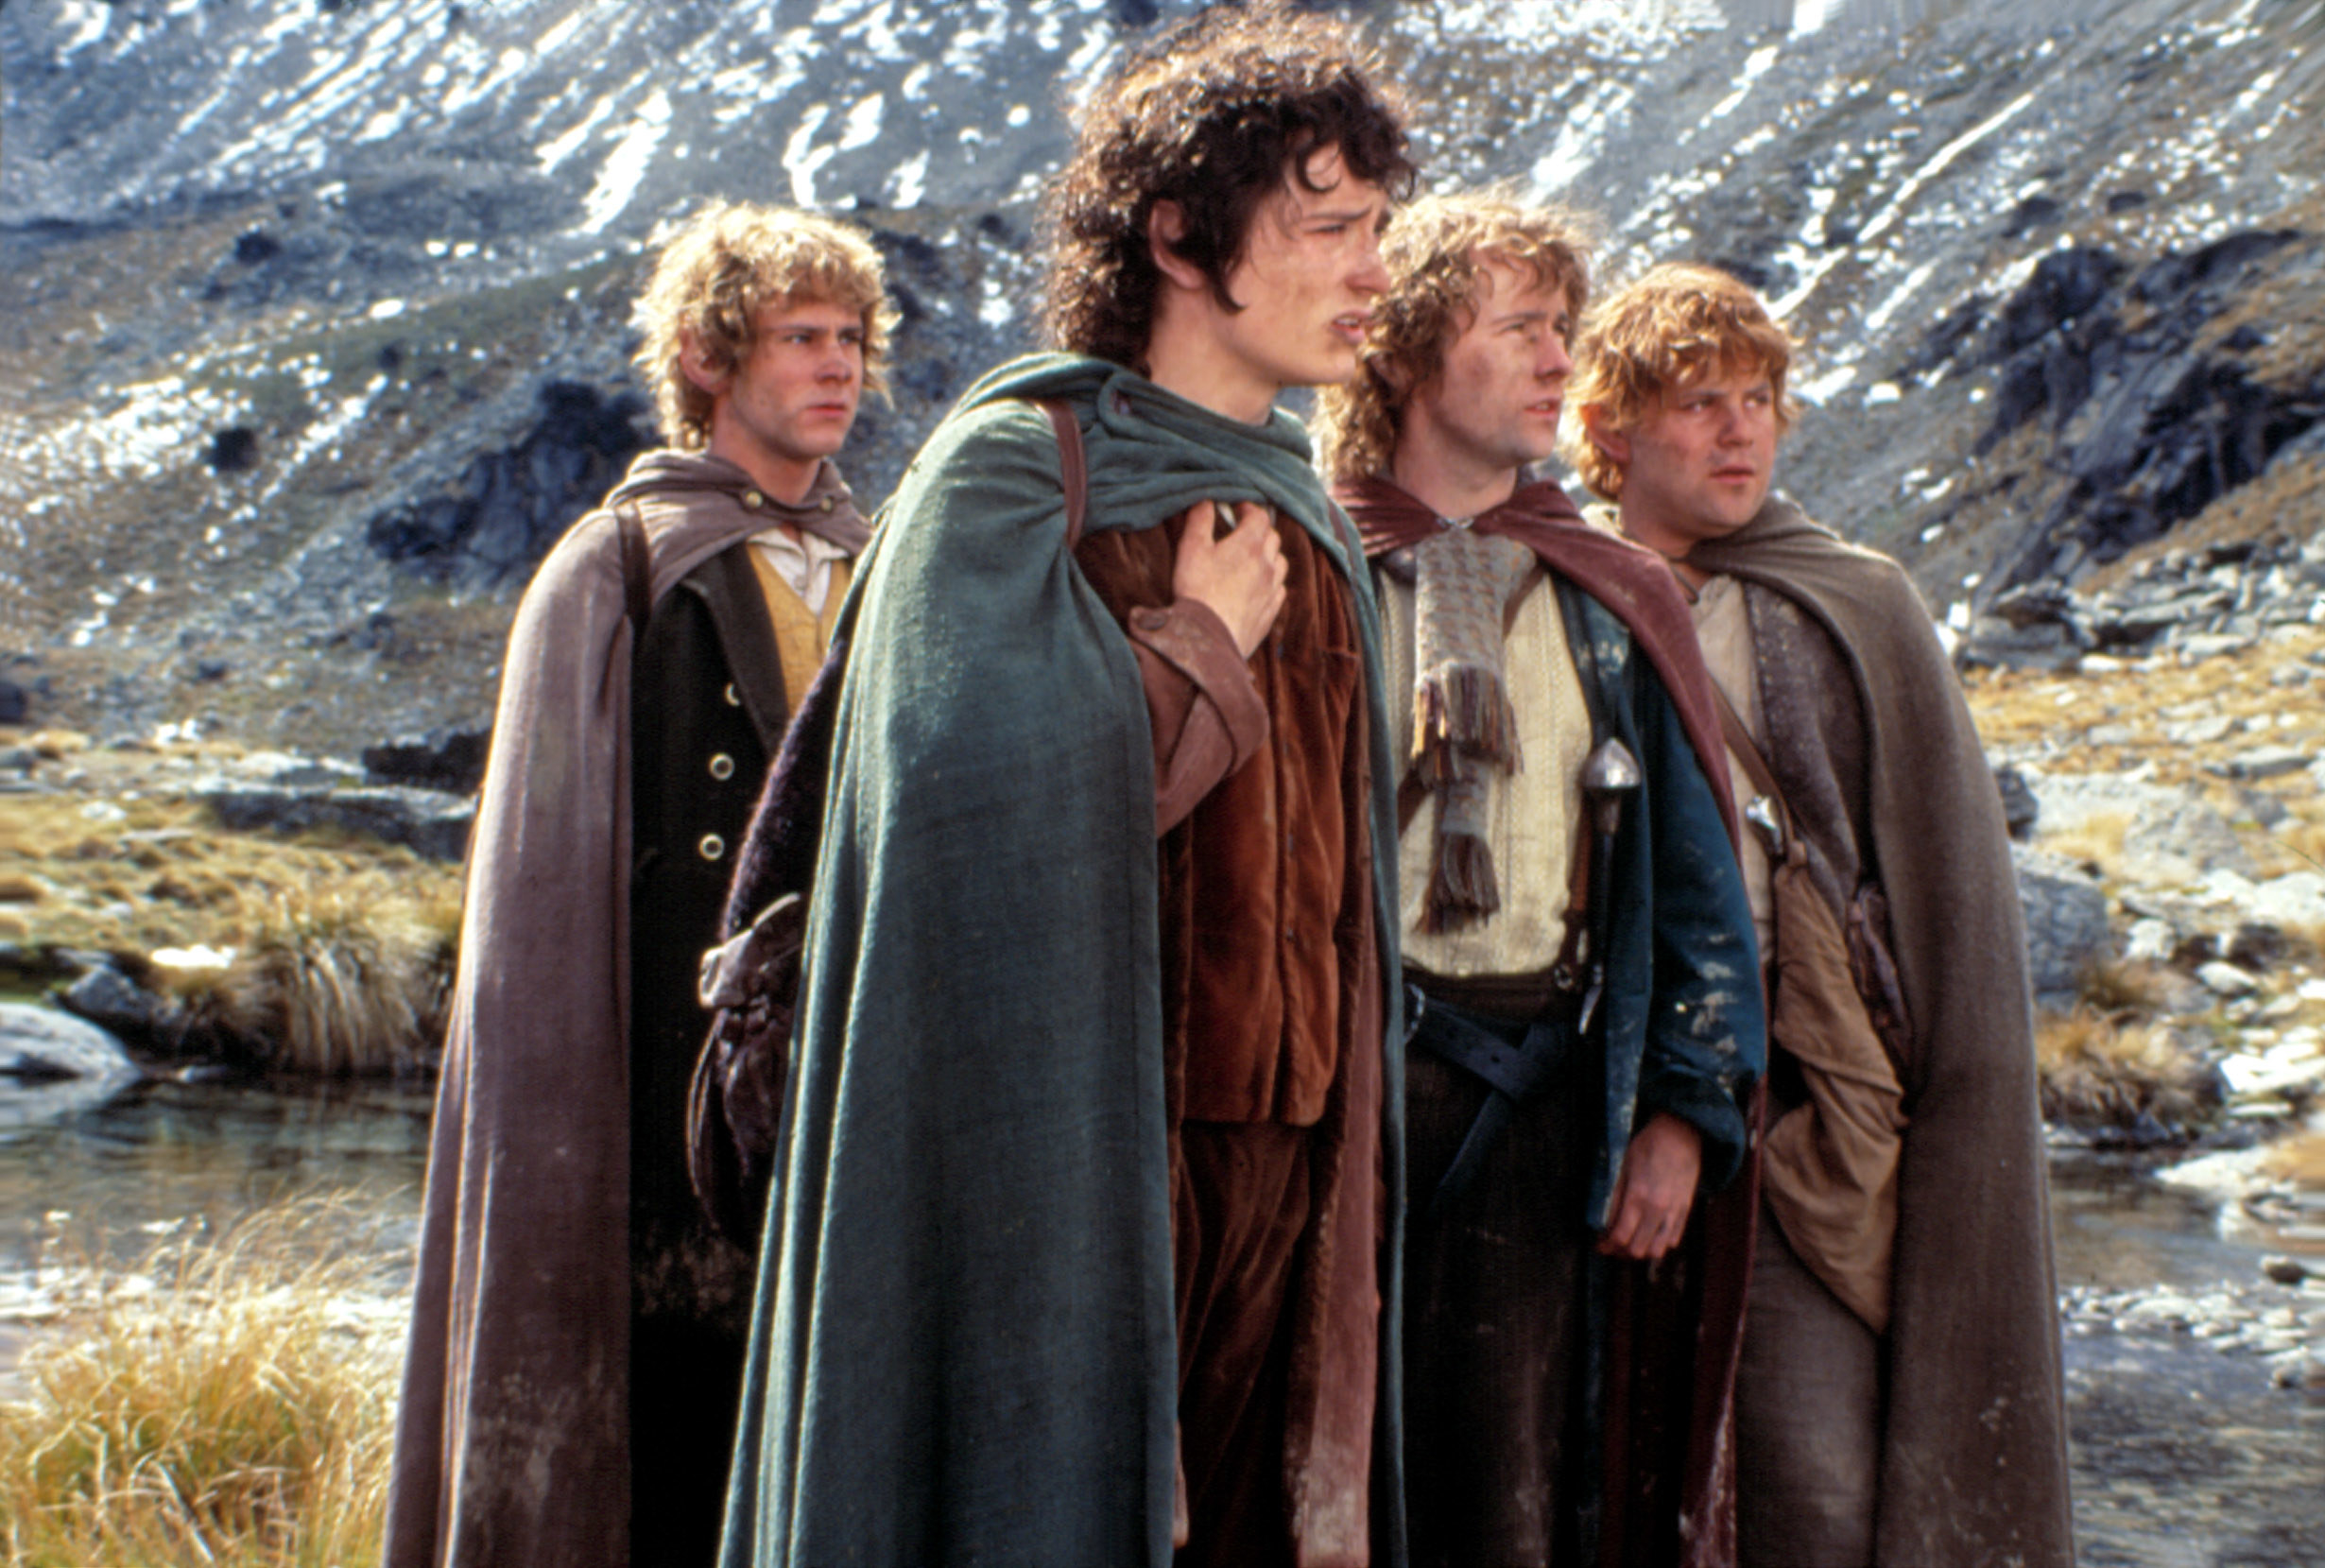 The lord of the rings cast looks into the distance